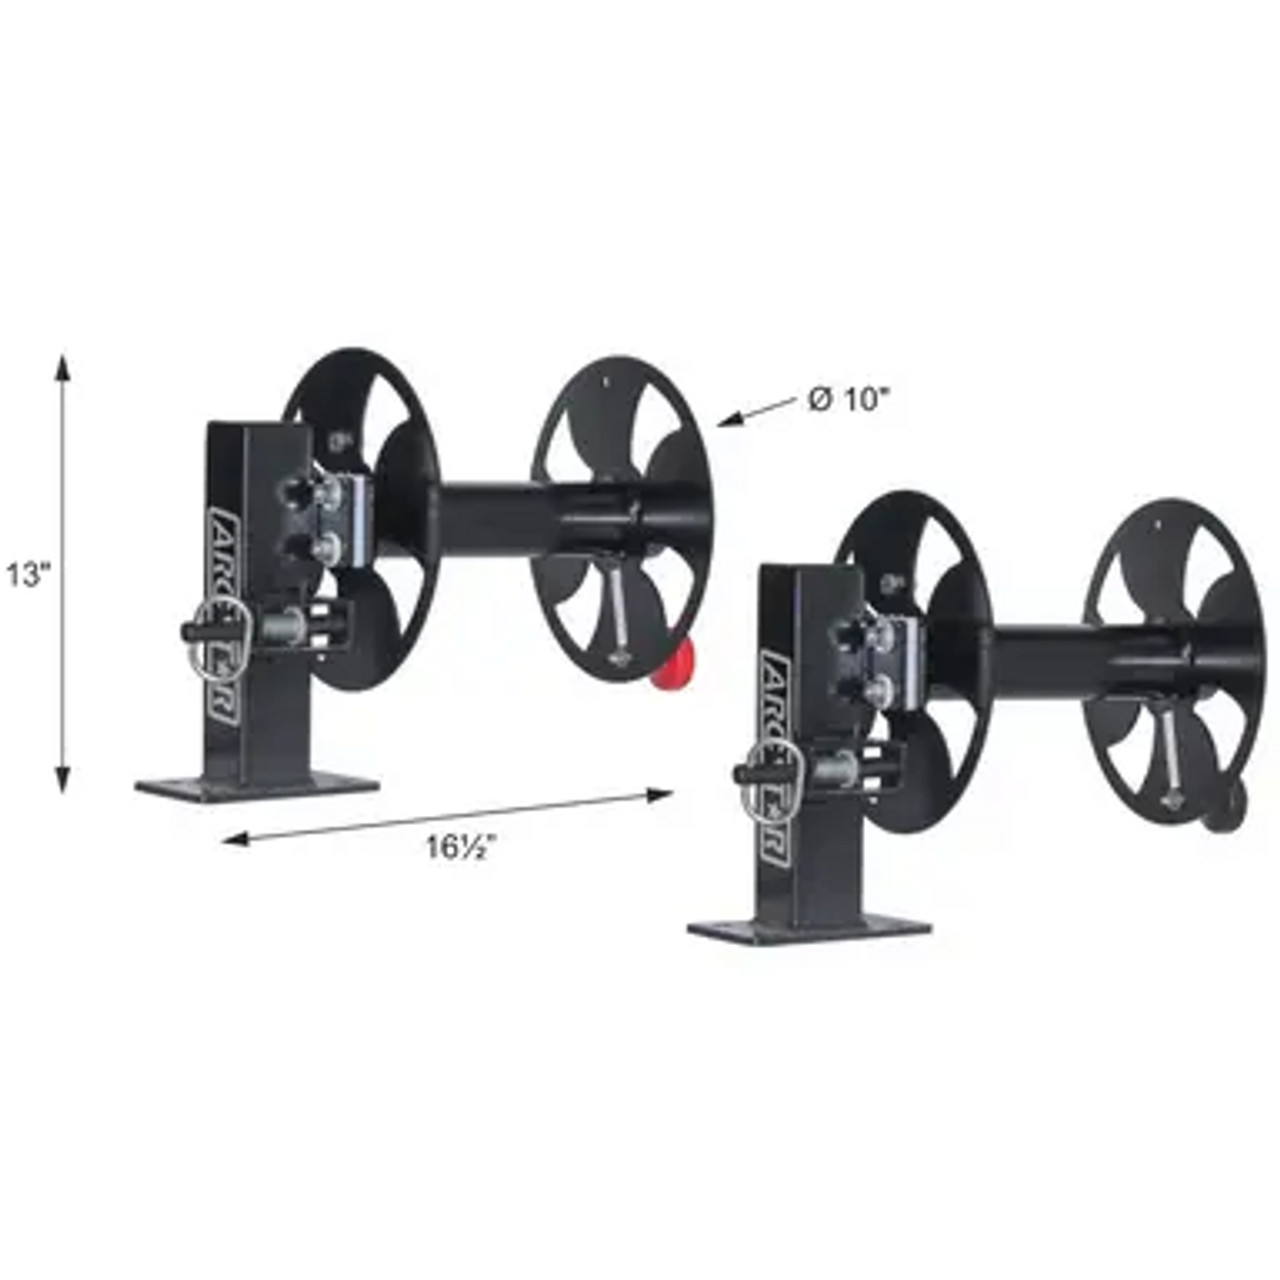 Revolution 10 Cable reels, 1 set of 2 Reels with Fixed Base 